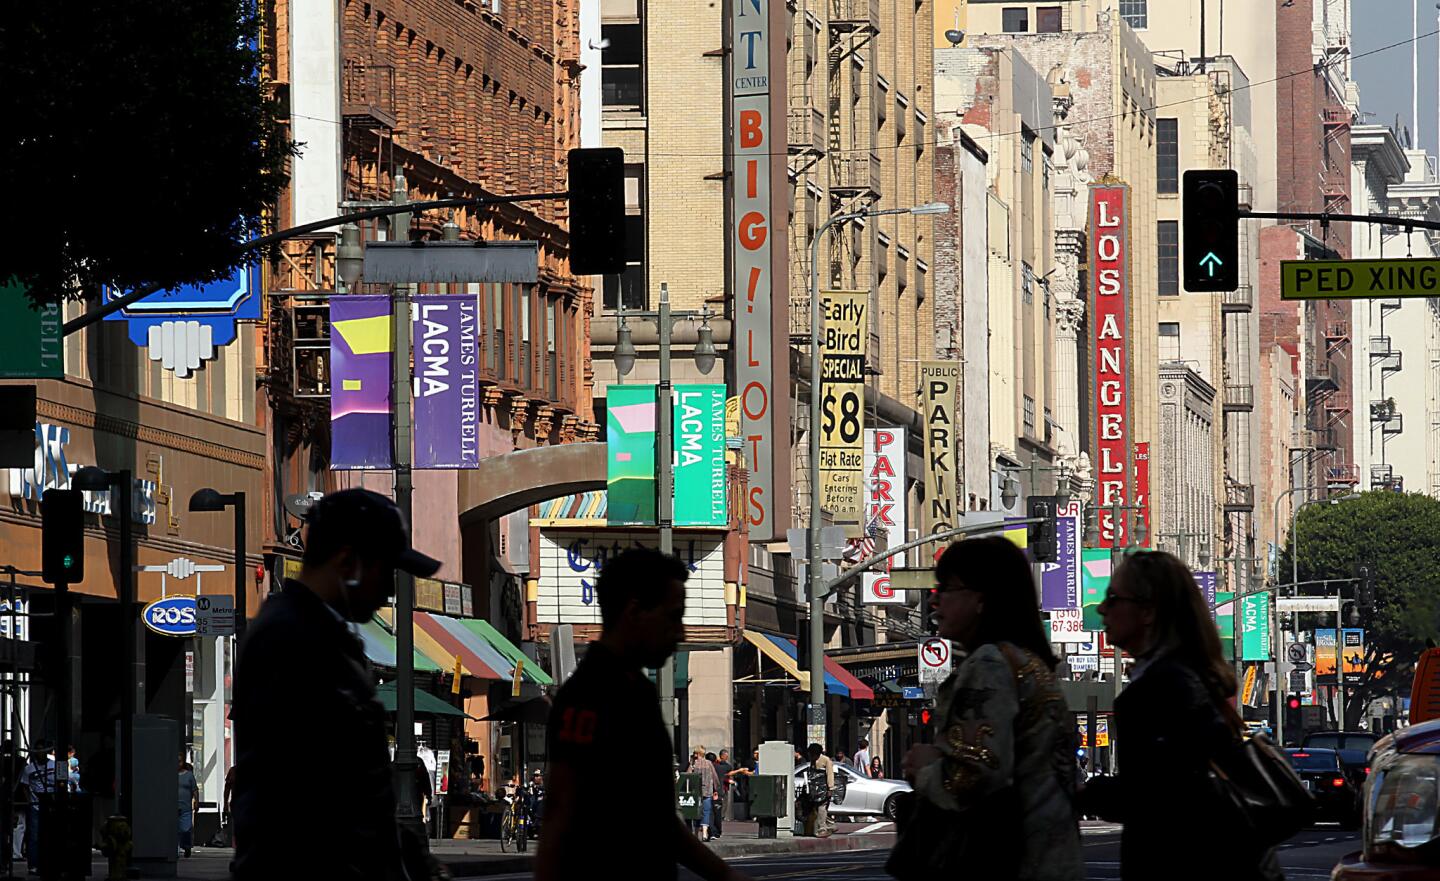 Pedestrians cross Broadway in L.A.'s historic commercial core. Businesses catering primarily to Latino immigrants have kept the sidewalks active as most buildings fell empty above the first floor.